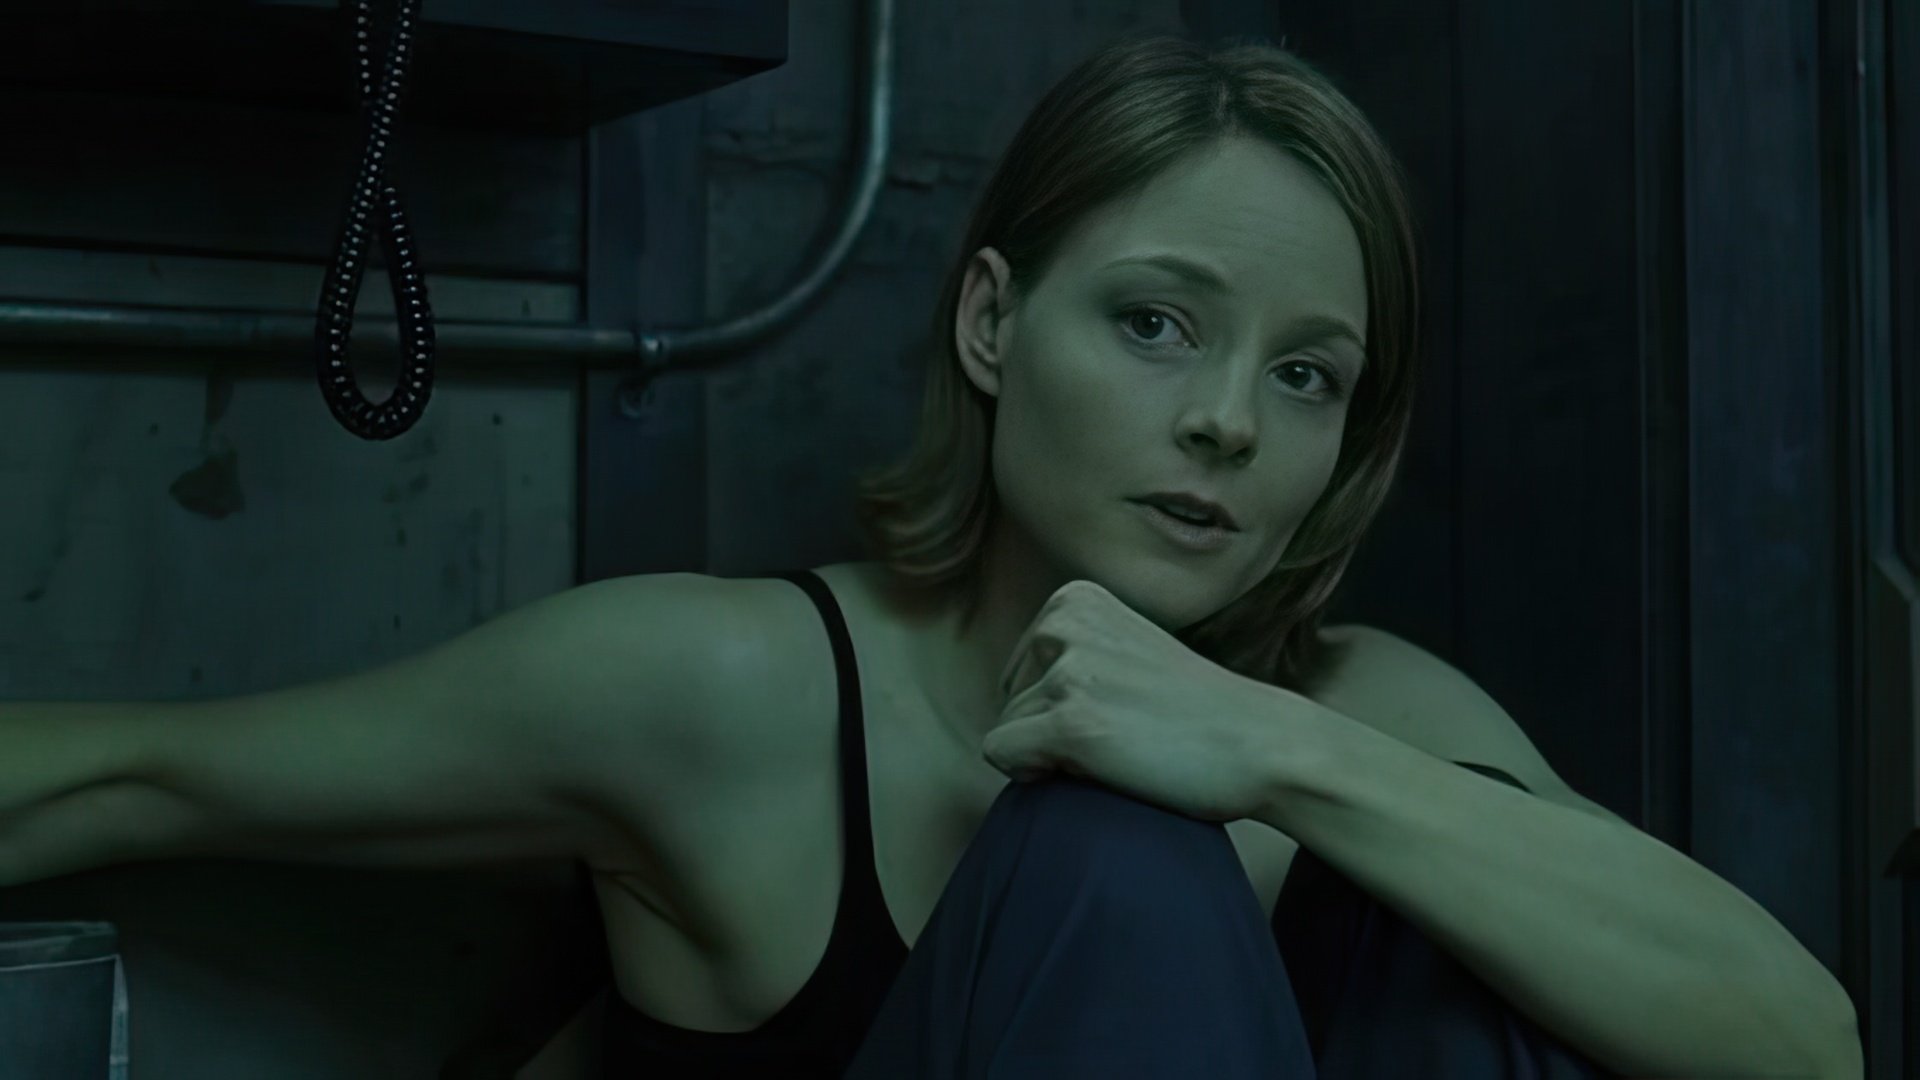 Still from the movie Panic Room